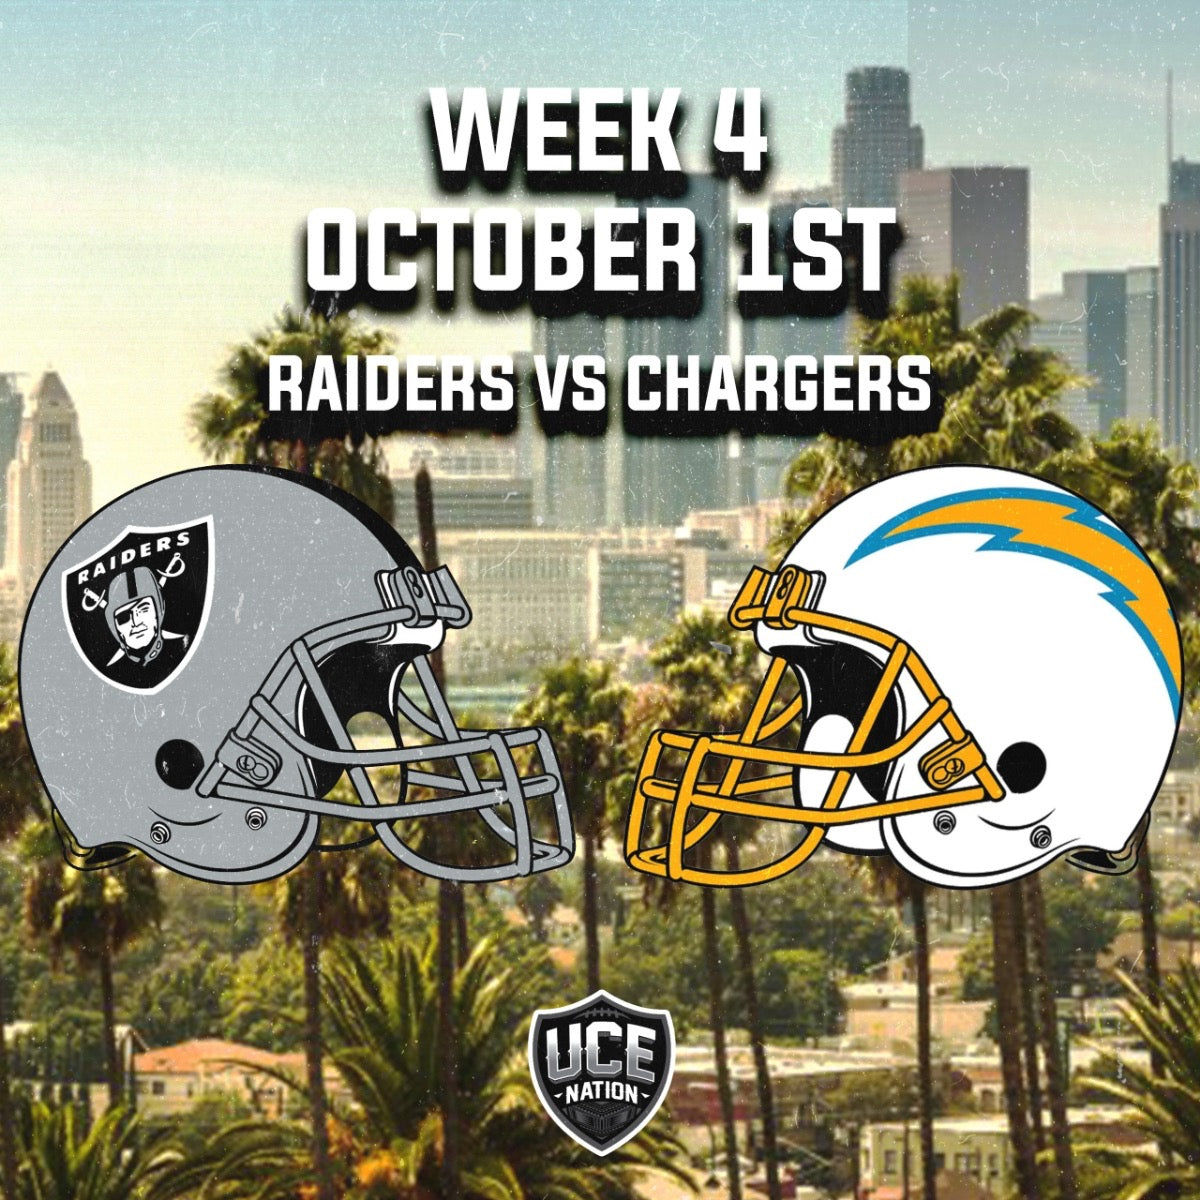 Raiders vs Chargers Week 4 Package Details – The UCE Nation